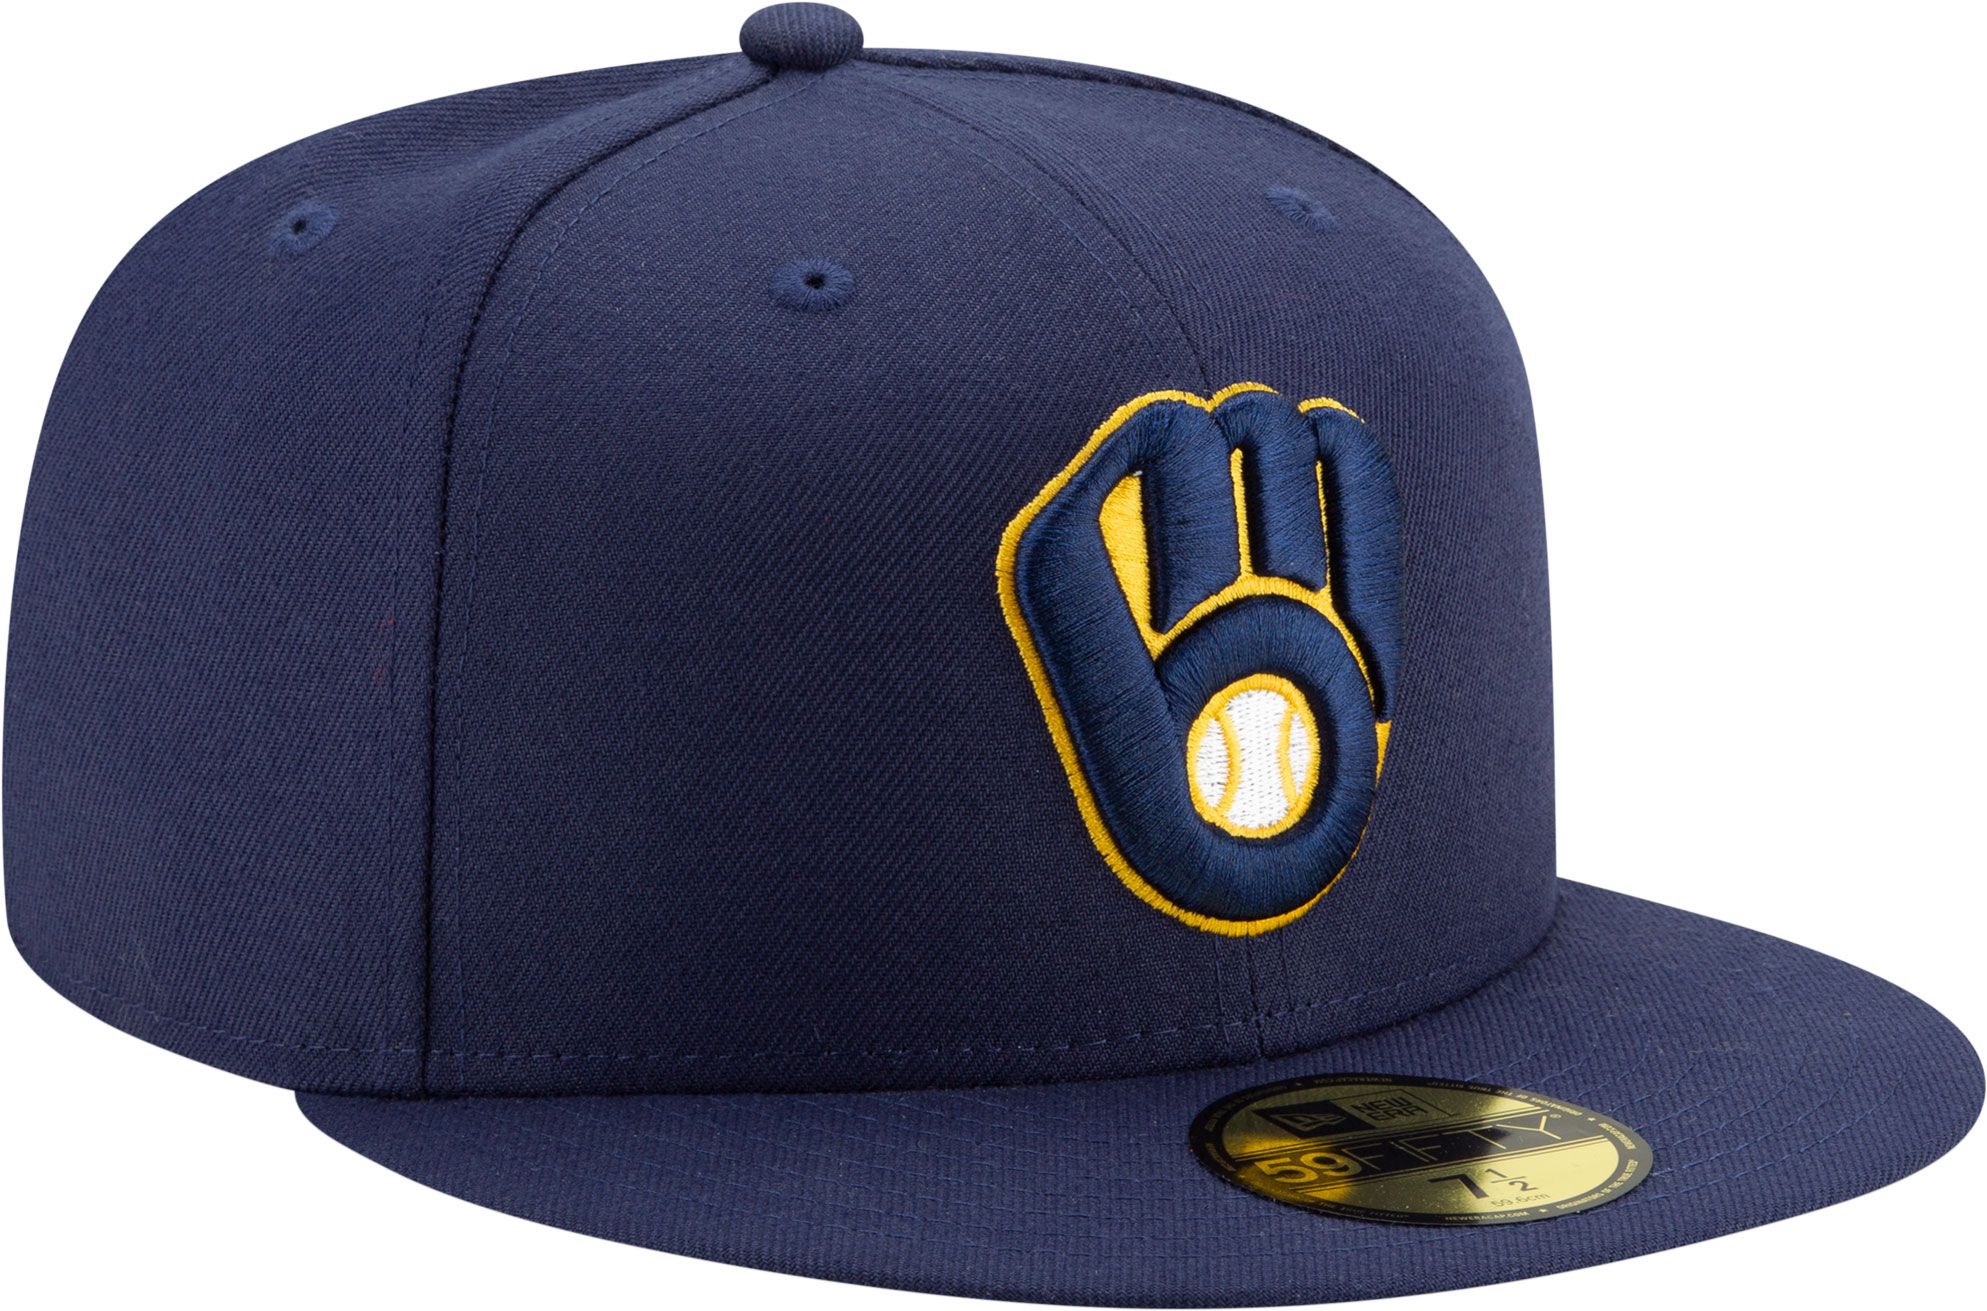 New Era Men's Milwaukee Brewers Navy 59Fifty Authentic Hat